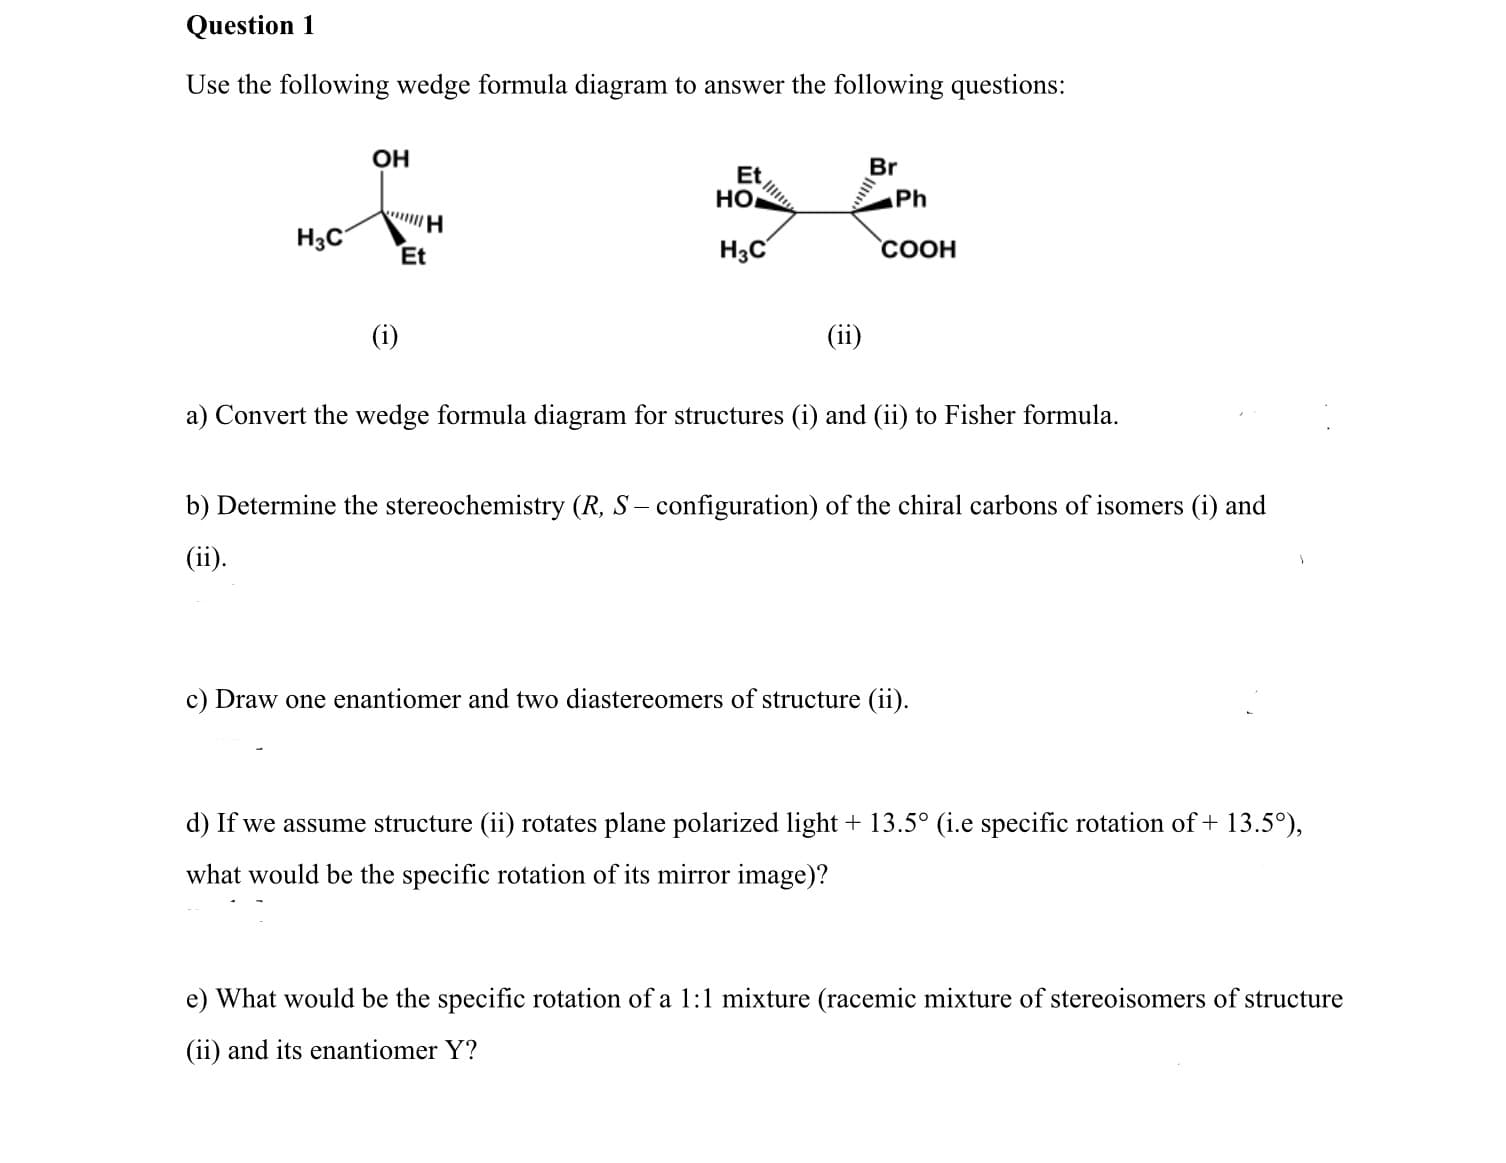 Question 1
Use the following wedge formula diagram to answer the following questions:
OH
Br
Et
HO
Ph
H3C
H3C
СООН
Et
(i)
(ii)
a) Convert the wedge formula diagram for structures (i) and (ii) to Fisher formula.
b) Determine the stereochemistry (R, S – configuration) of the chiral carbons of isomers (i) and
(ii).
c) Draw one enantiomer and two diastereomers of structure (ii).
d) If we assume structure (ii) rotates plane polarized light + 13.5° (i.e specific rotation of + 13.5°),
what would be the specific rotation of its mirror image)?
e) What would be the specific rotation of a 1:1 mixture (racemic mixture of stereoisomers of structure
(ii) and its enantiomer Y?
